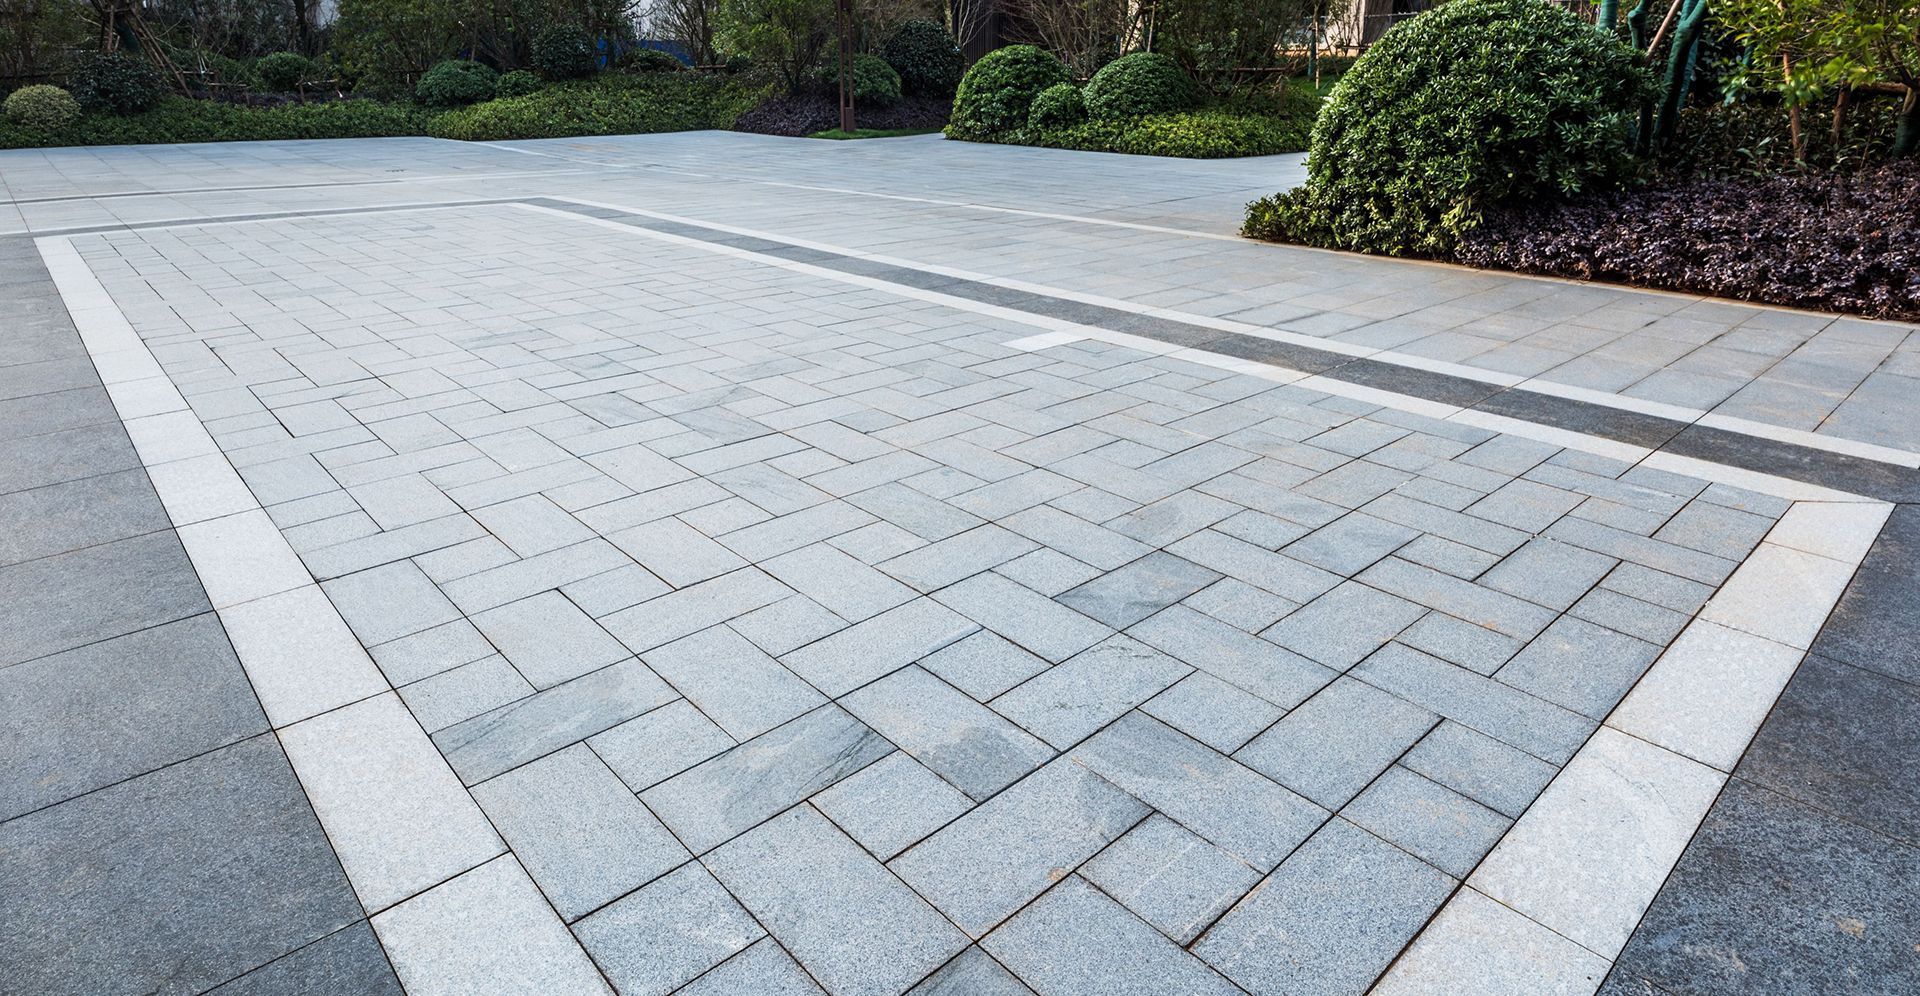 driveway paving installation services in Kingsport, TN